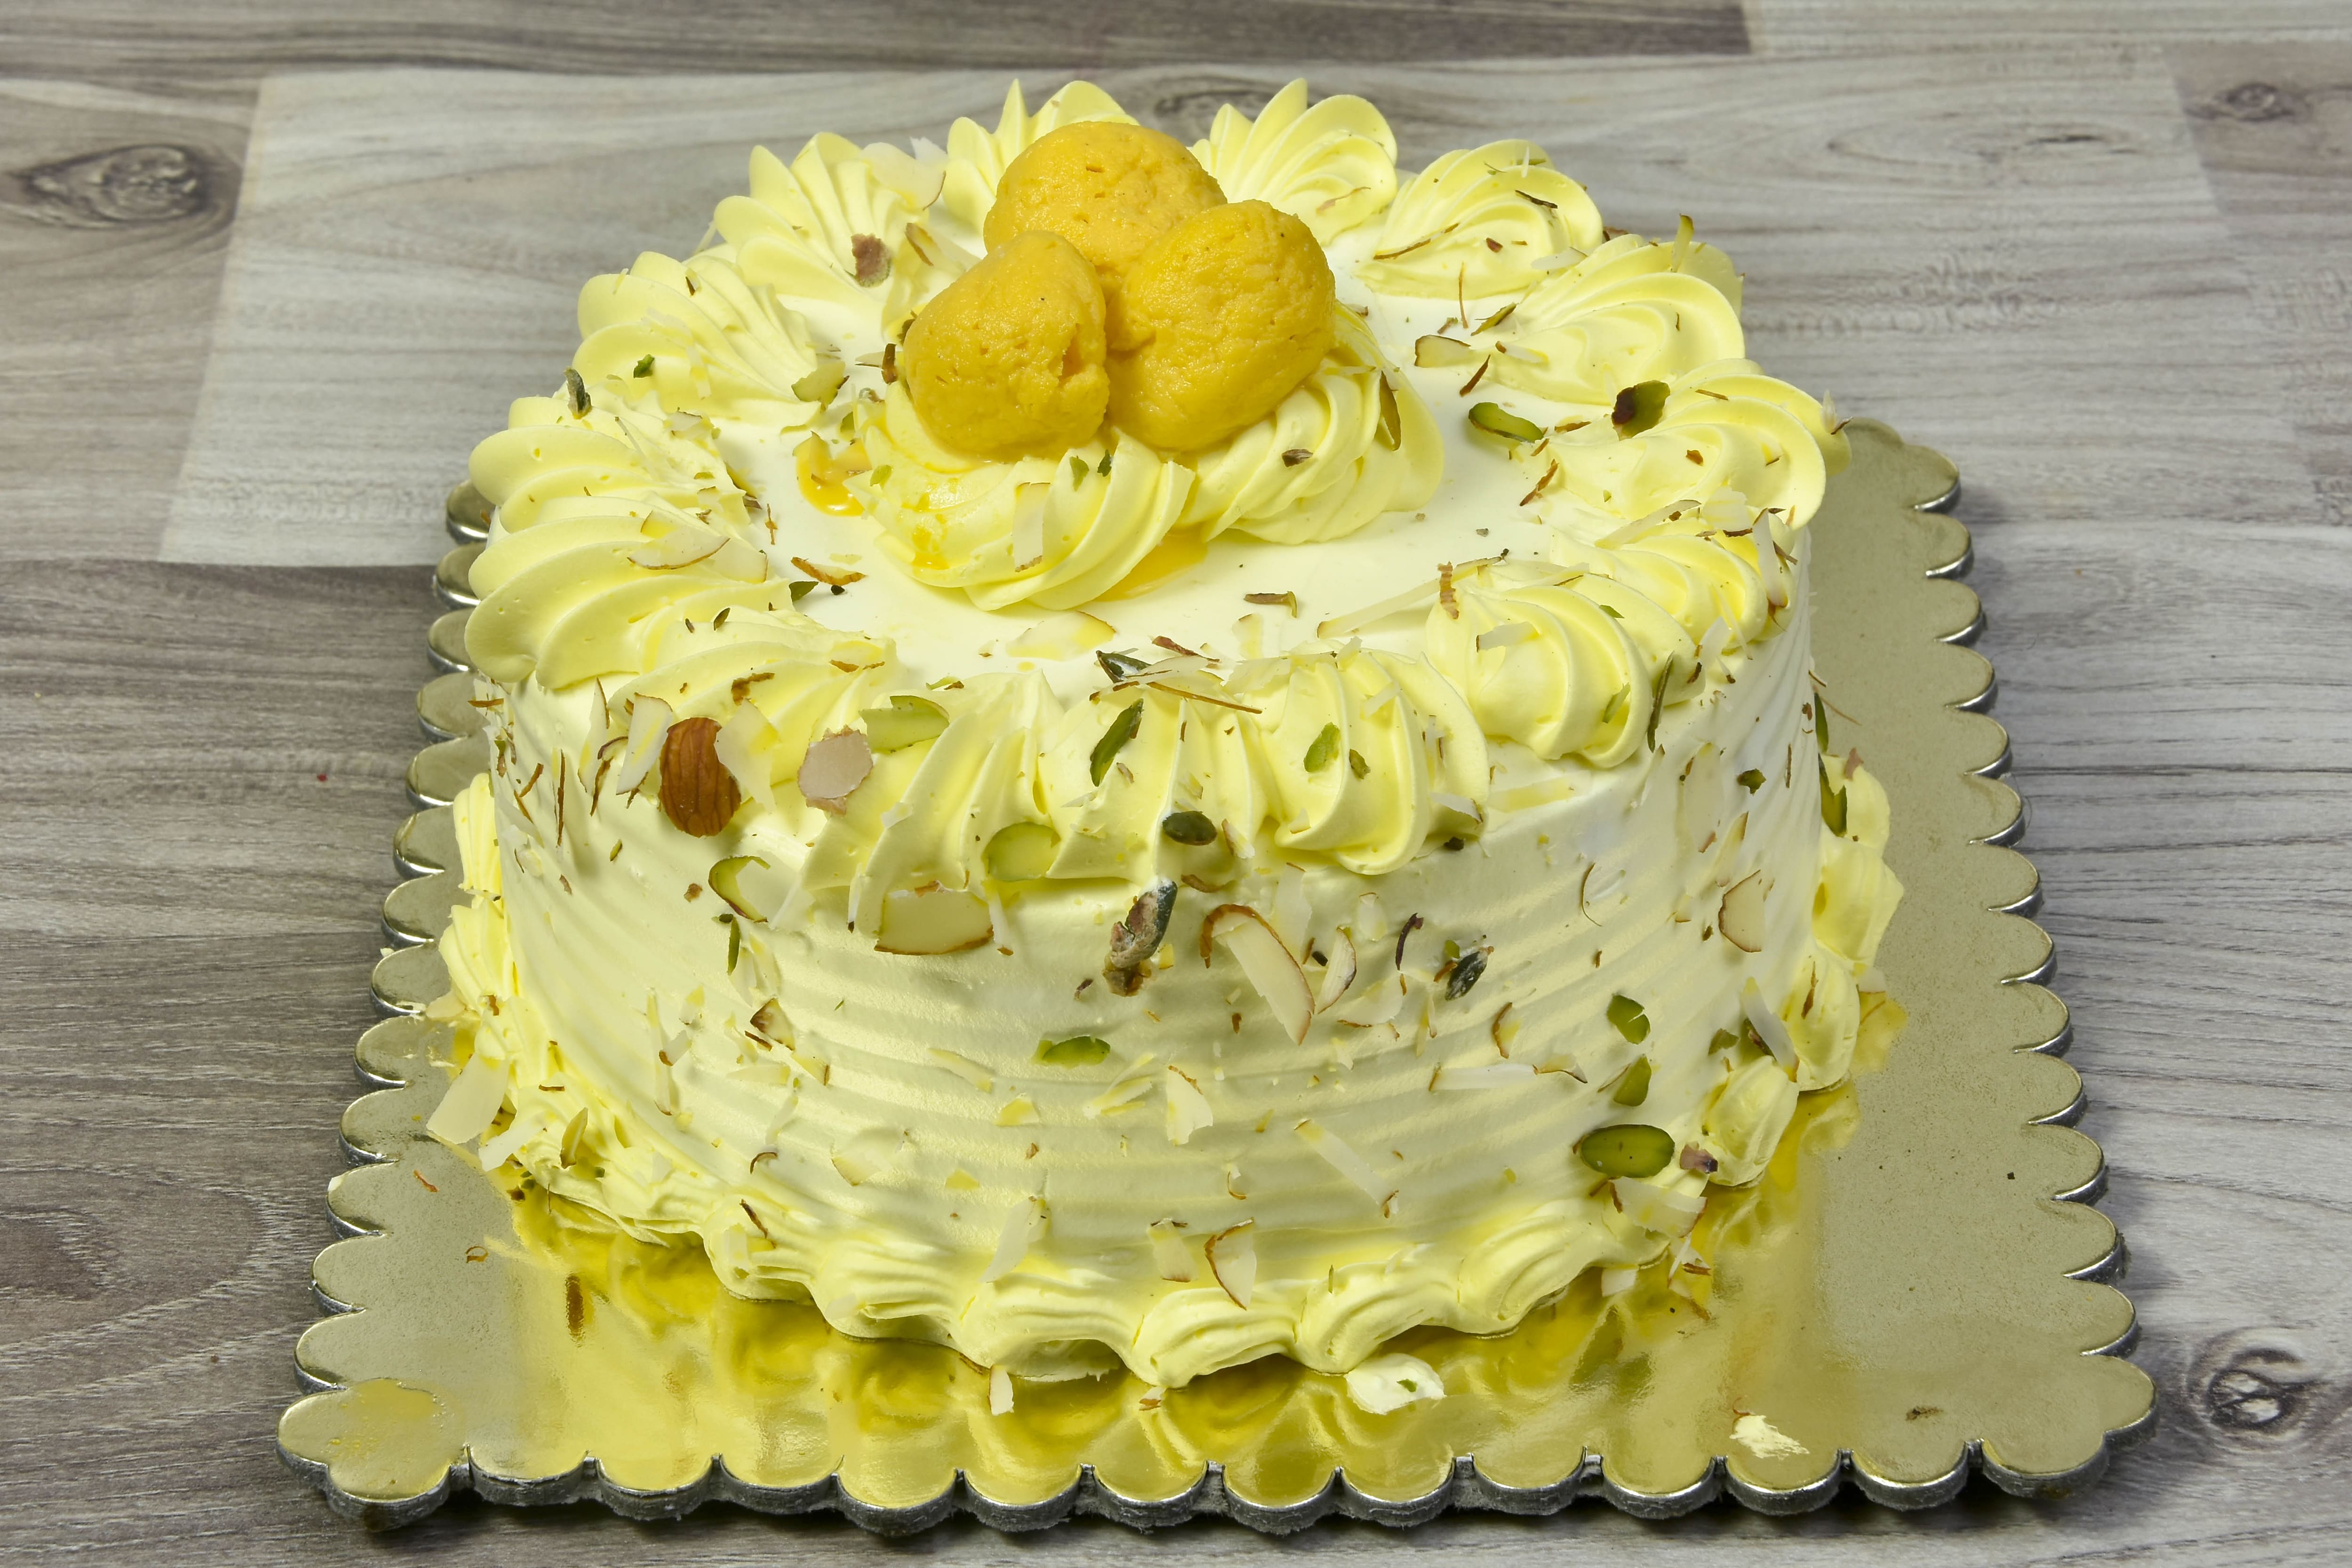 Cocoadip (Cake Services) in Mankapur,Nagpur - Best Cake Shops in Nagpur -  Justdial